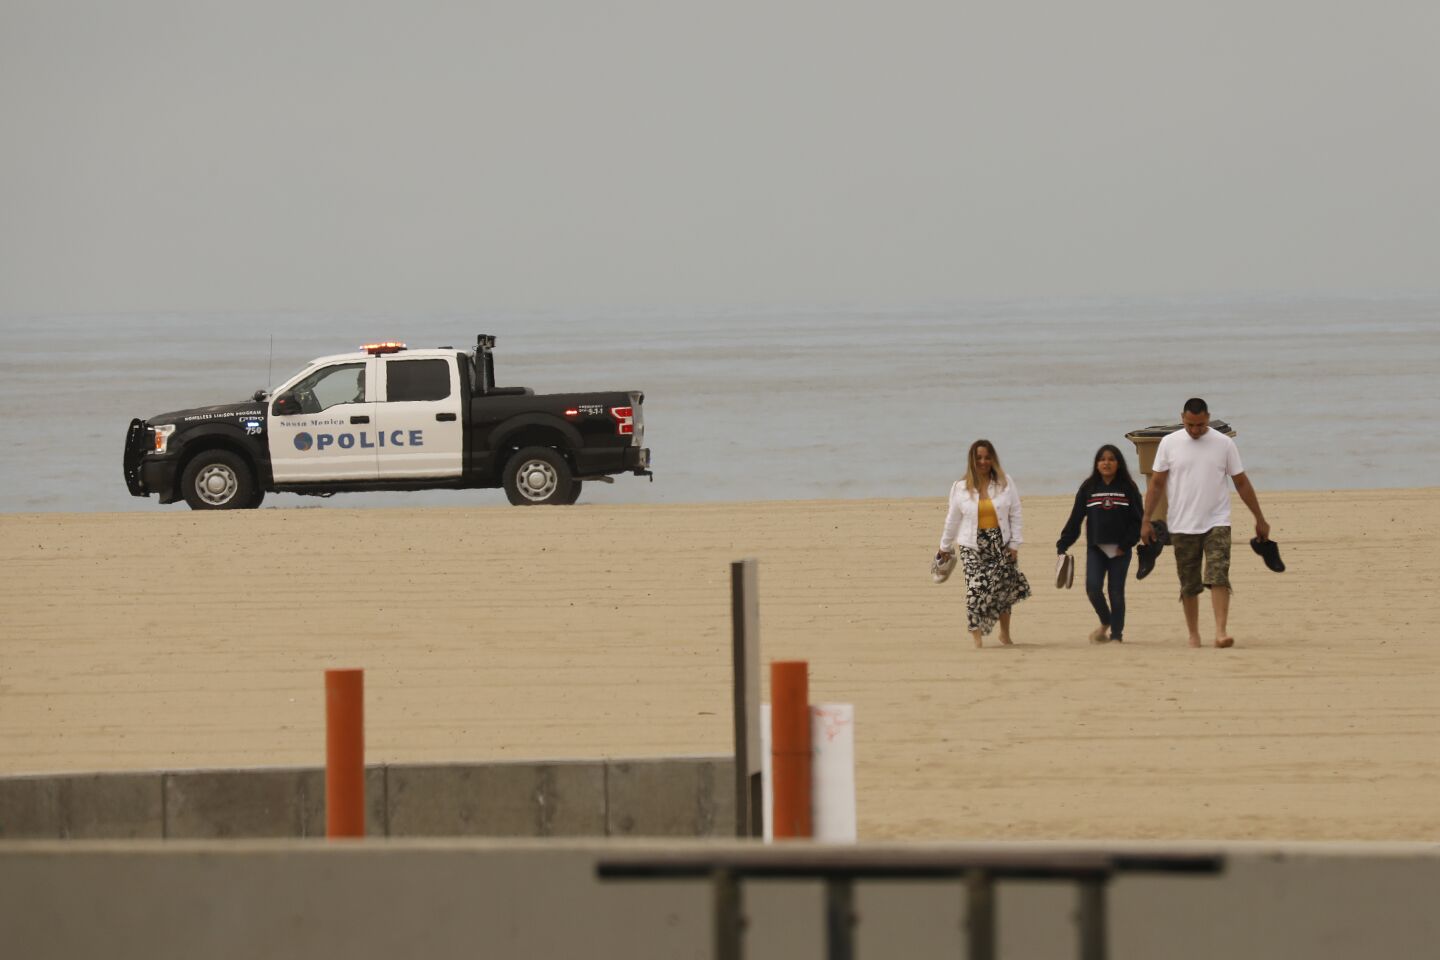 L.A. County beaches scheduled to reopen for active use